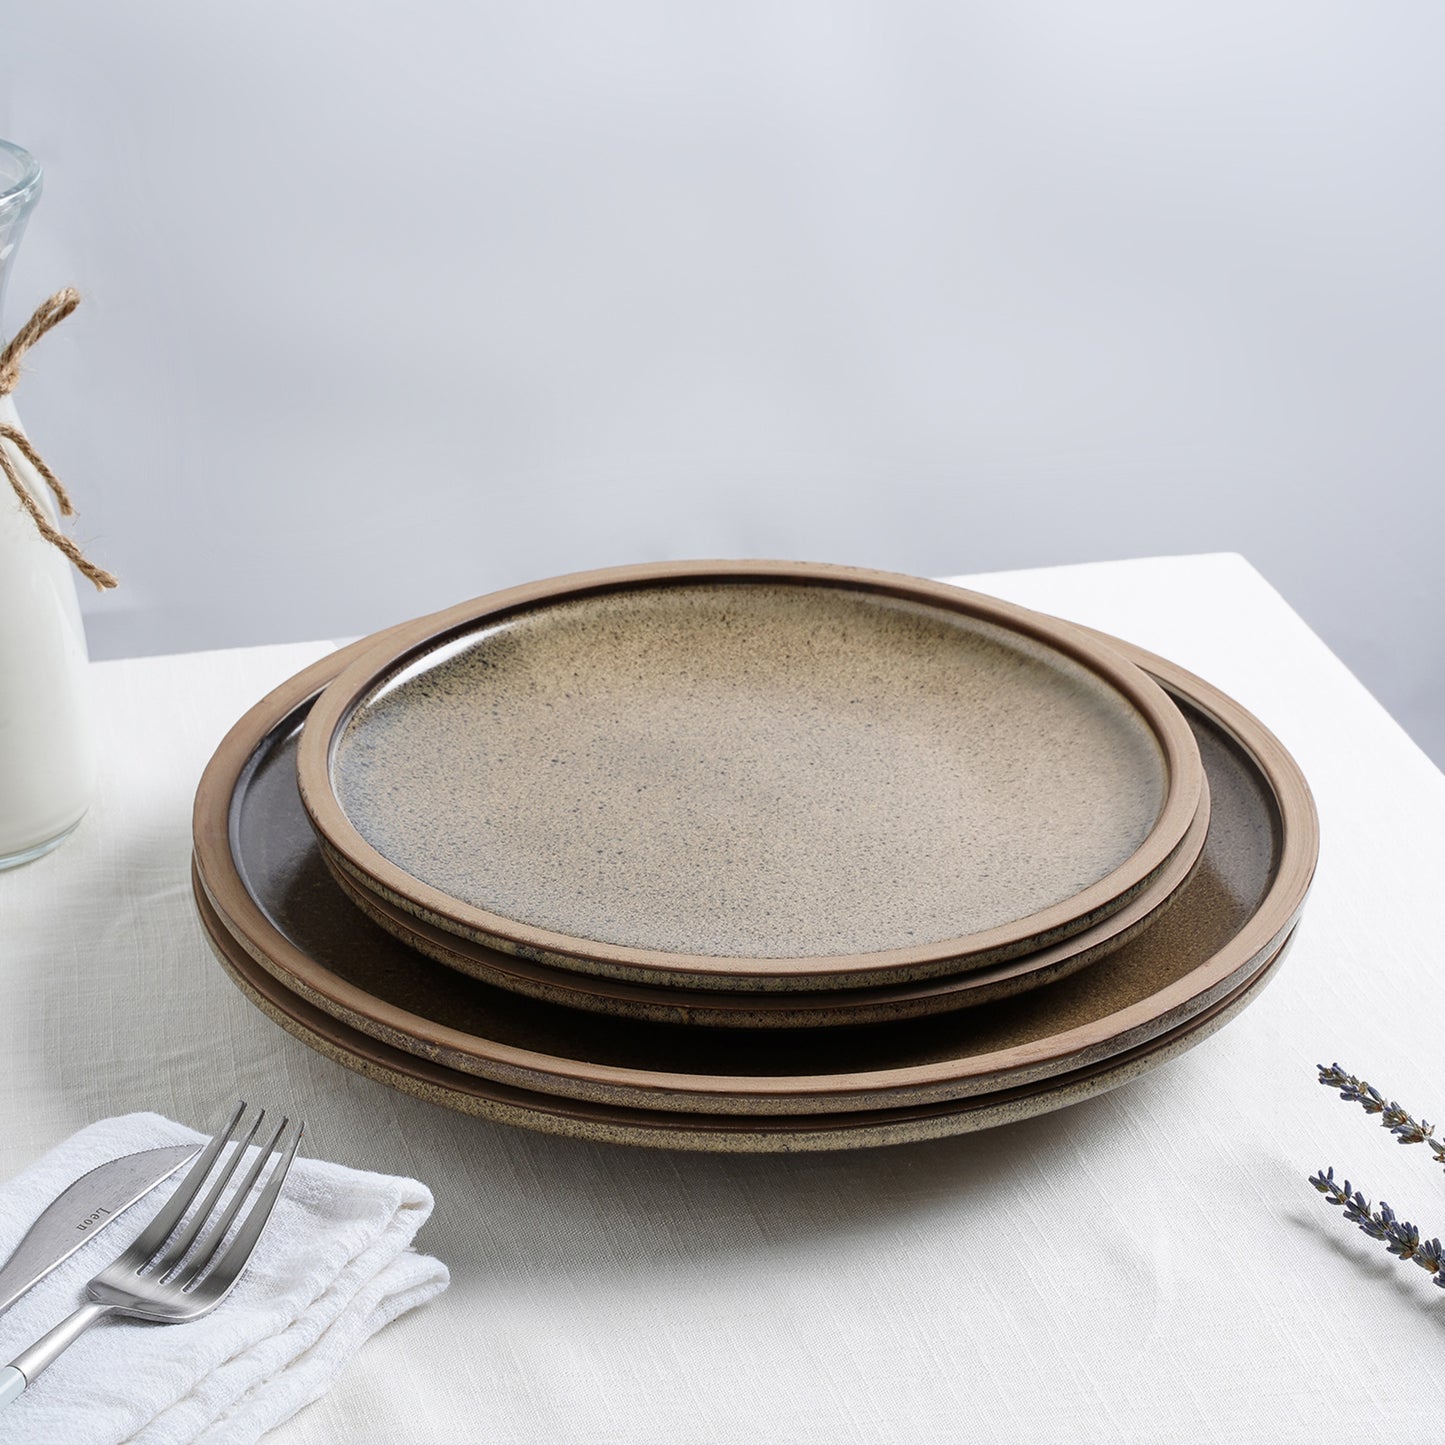 Tina Stoneware Salad Plate - Green And Beige